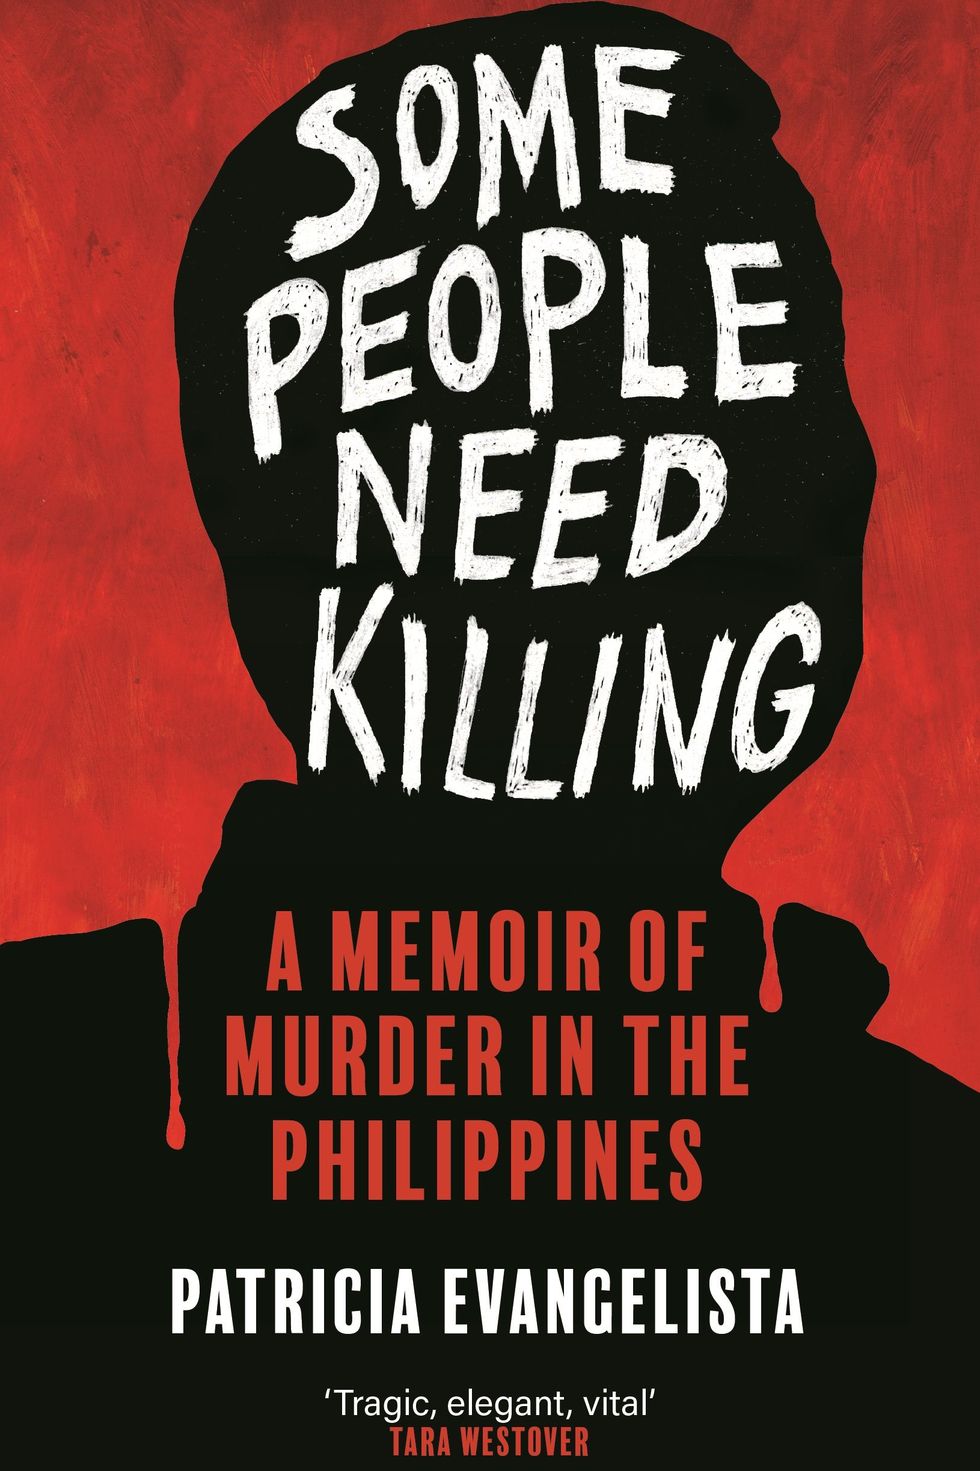 'Some People Need Killing: A Memoir of Murder in the Philippines' by Patricia Evangelista